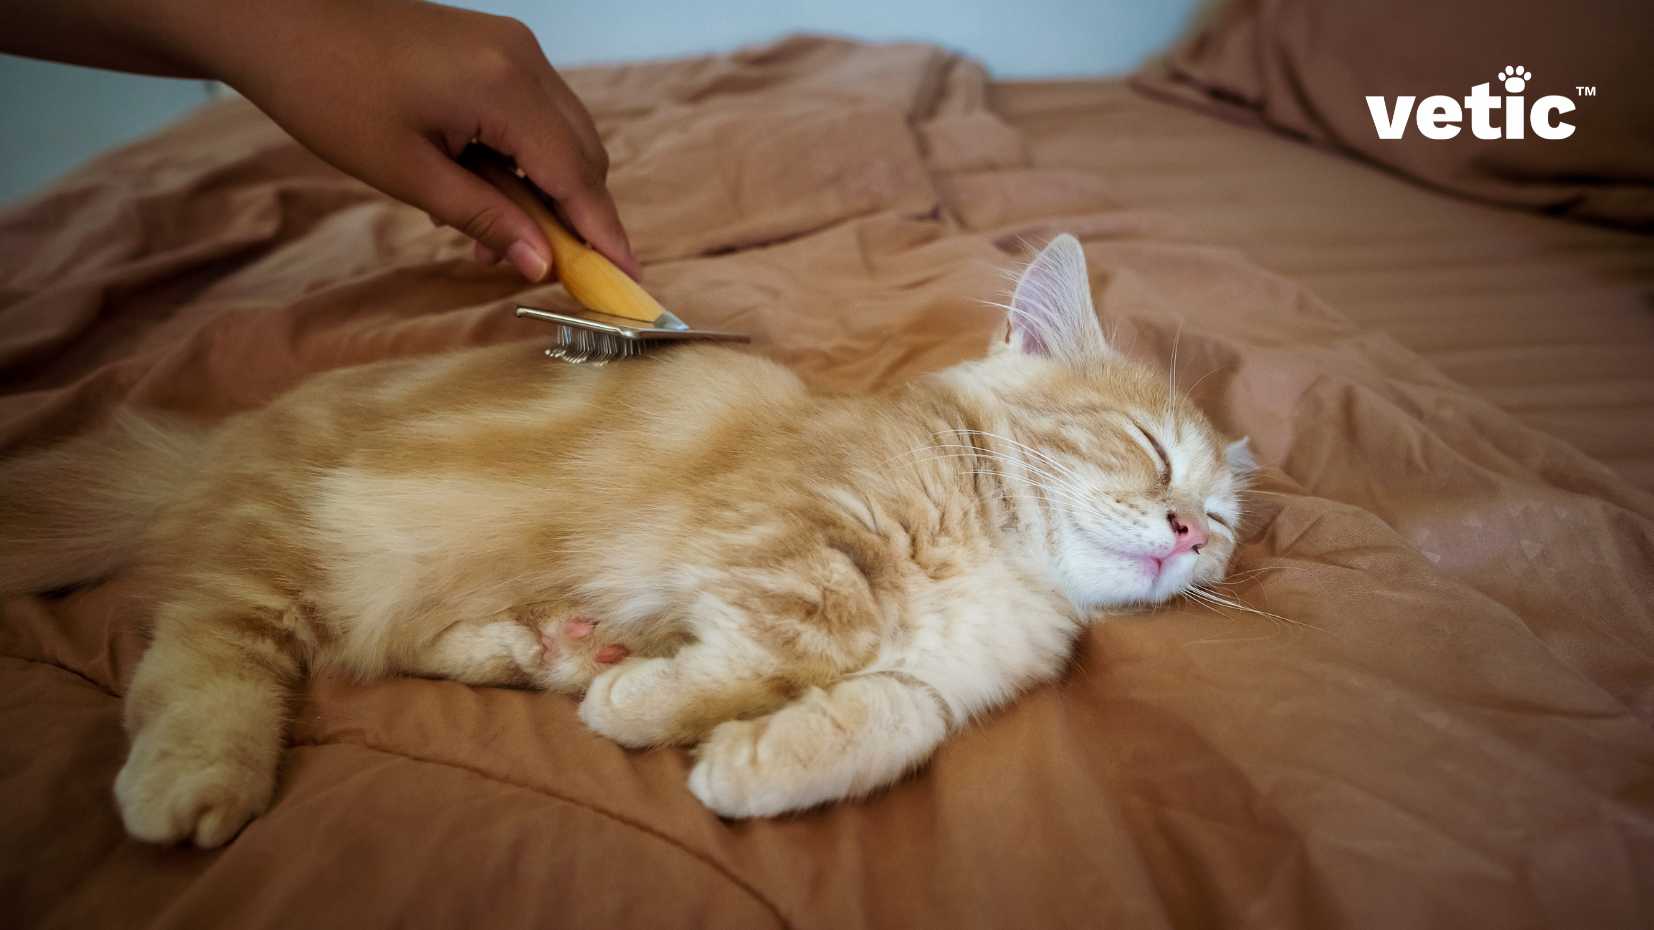 This photo shows a close-up of a cat’s face while being groomed with a metal comb. The cat has orange and white fur and is looking at the camera. The person is holding the comb in the left hand showing how to groom your short-haired cat. the image has a text that says “vetic™”.